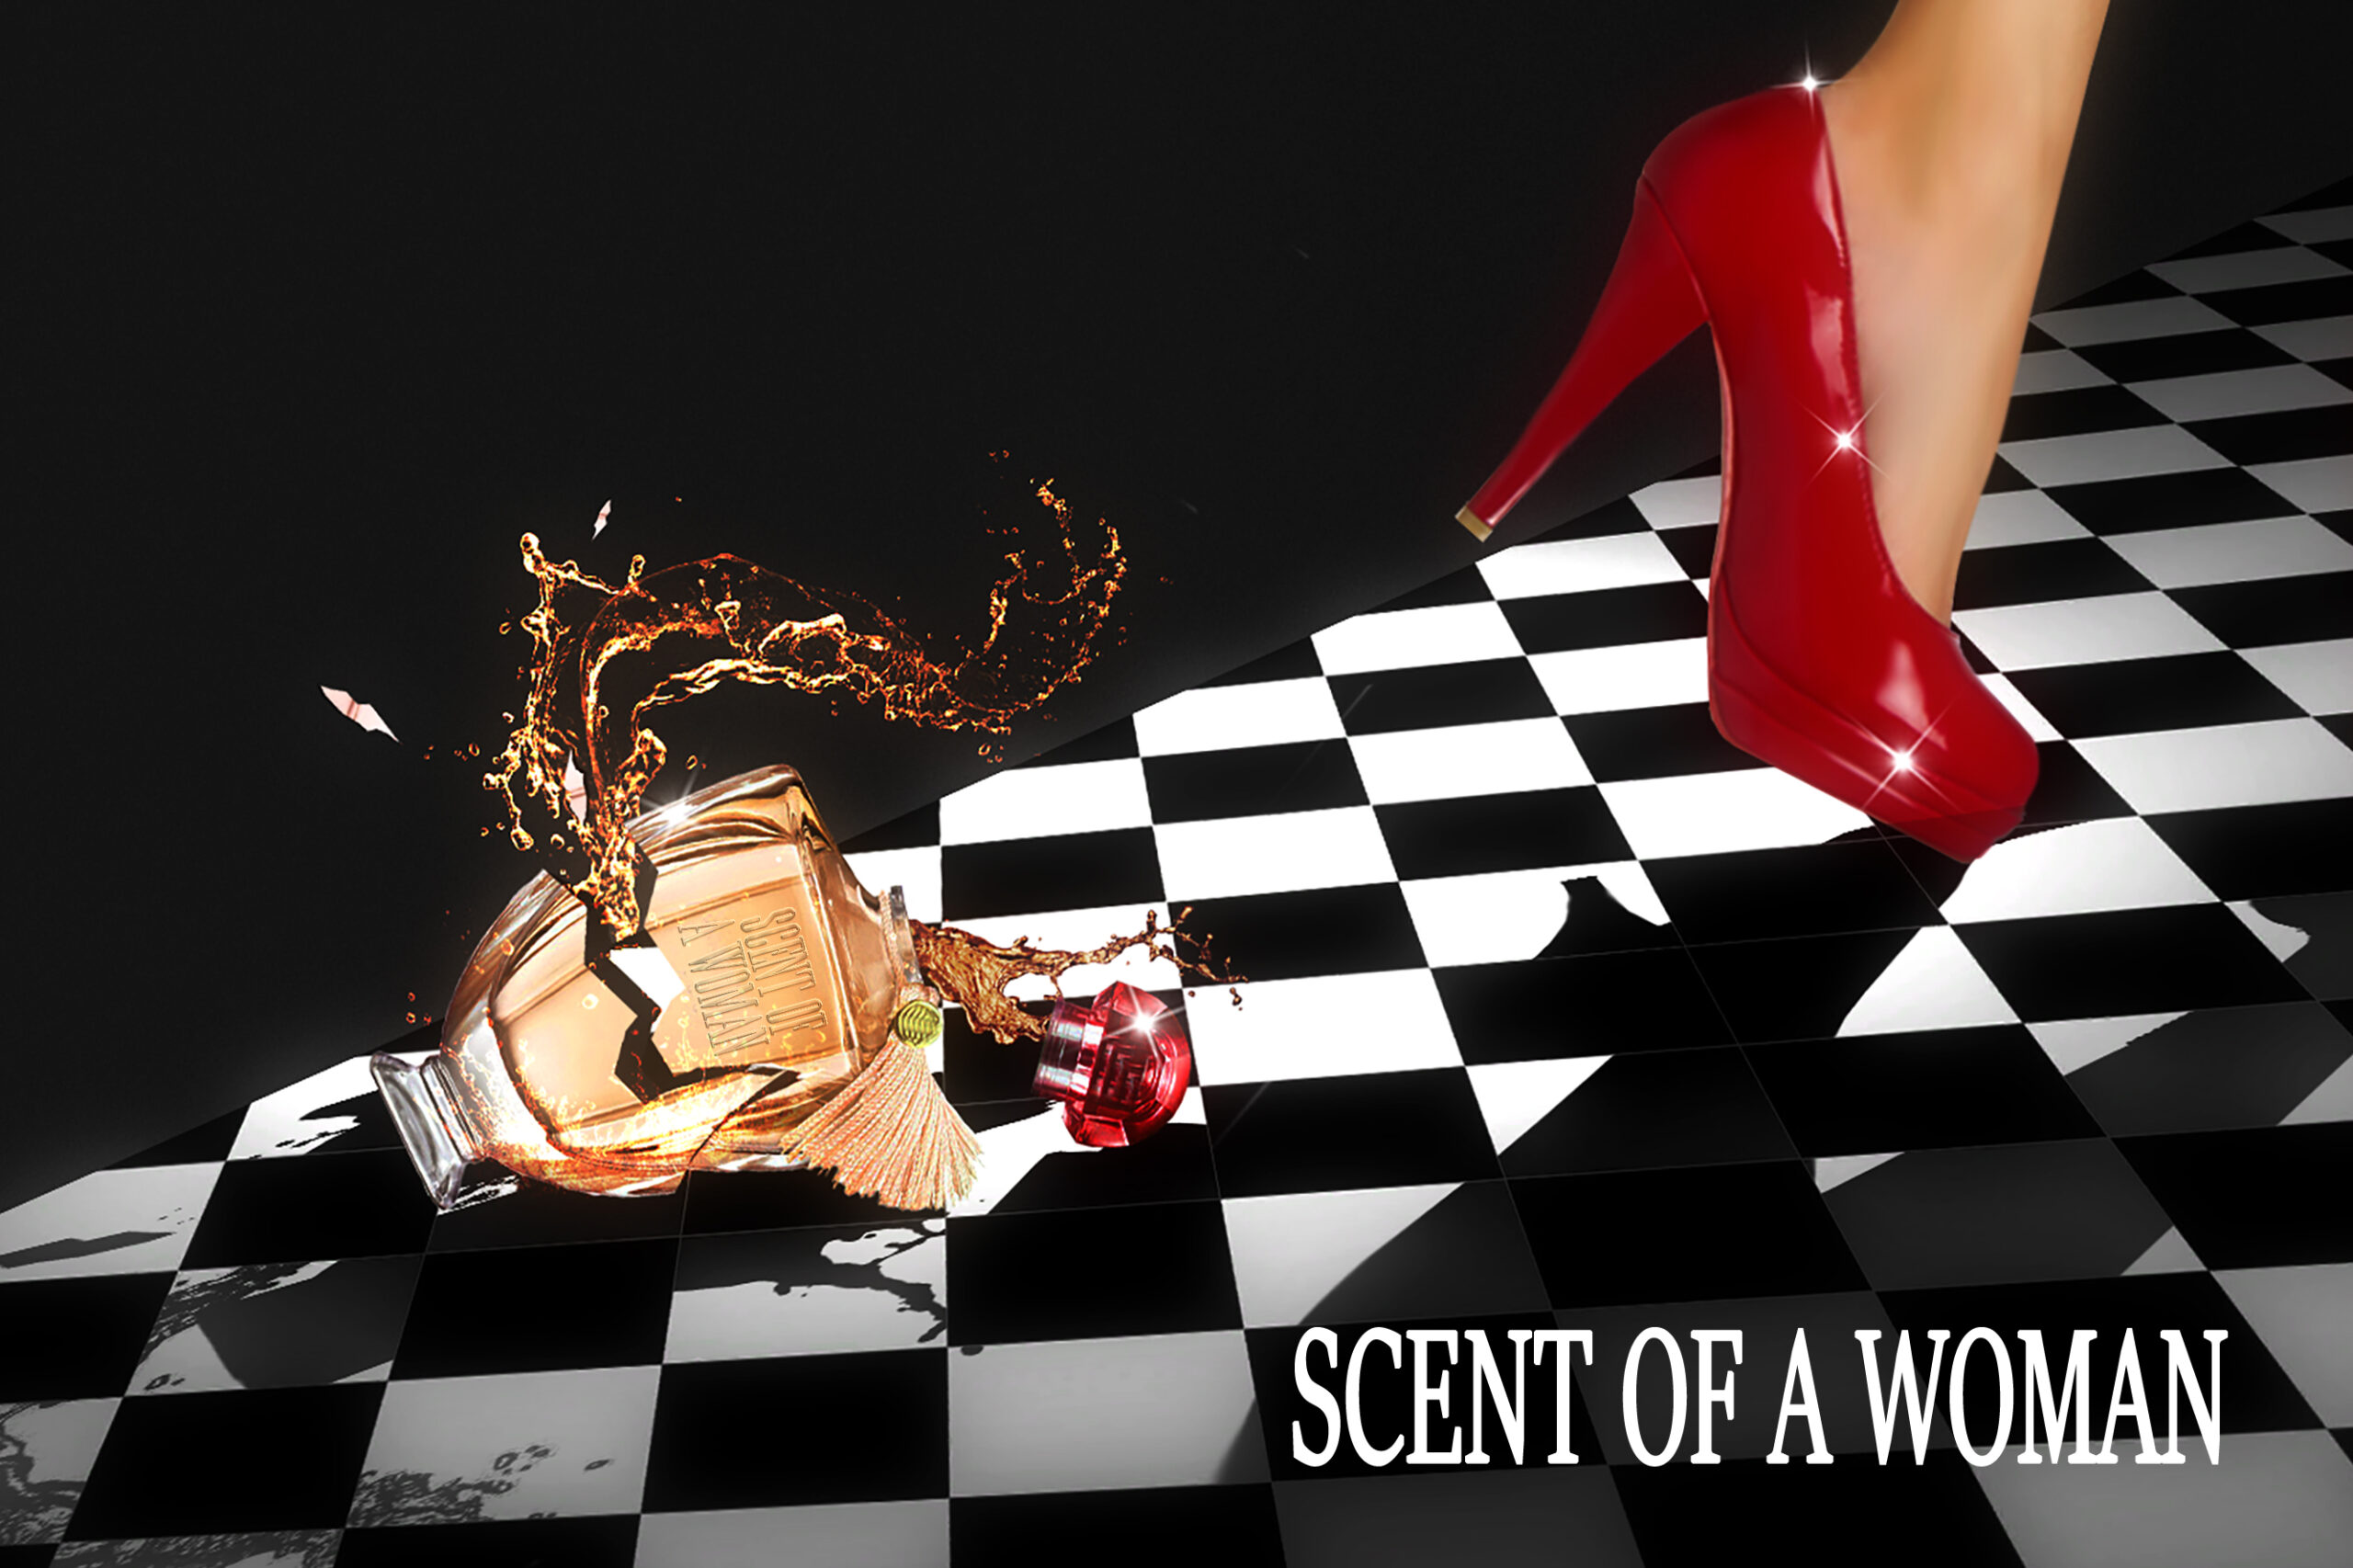 electrozombies featured “Scent Of A Woman”